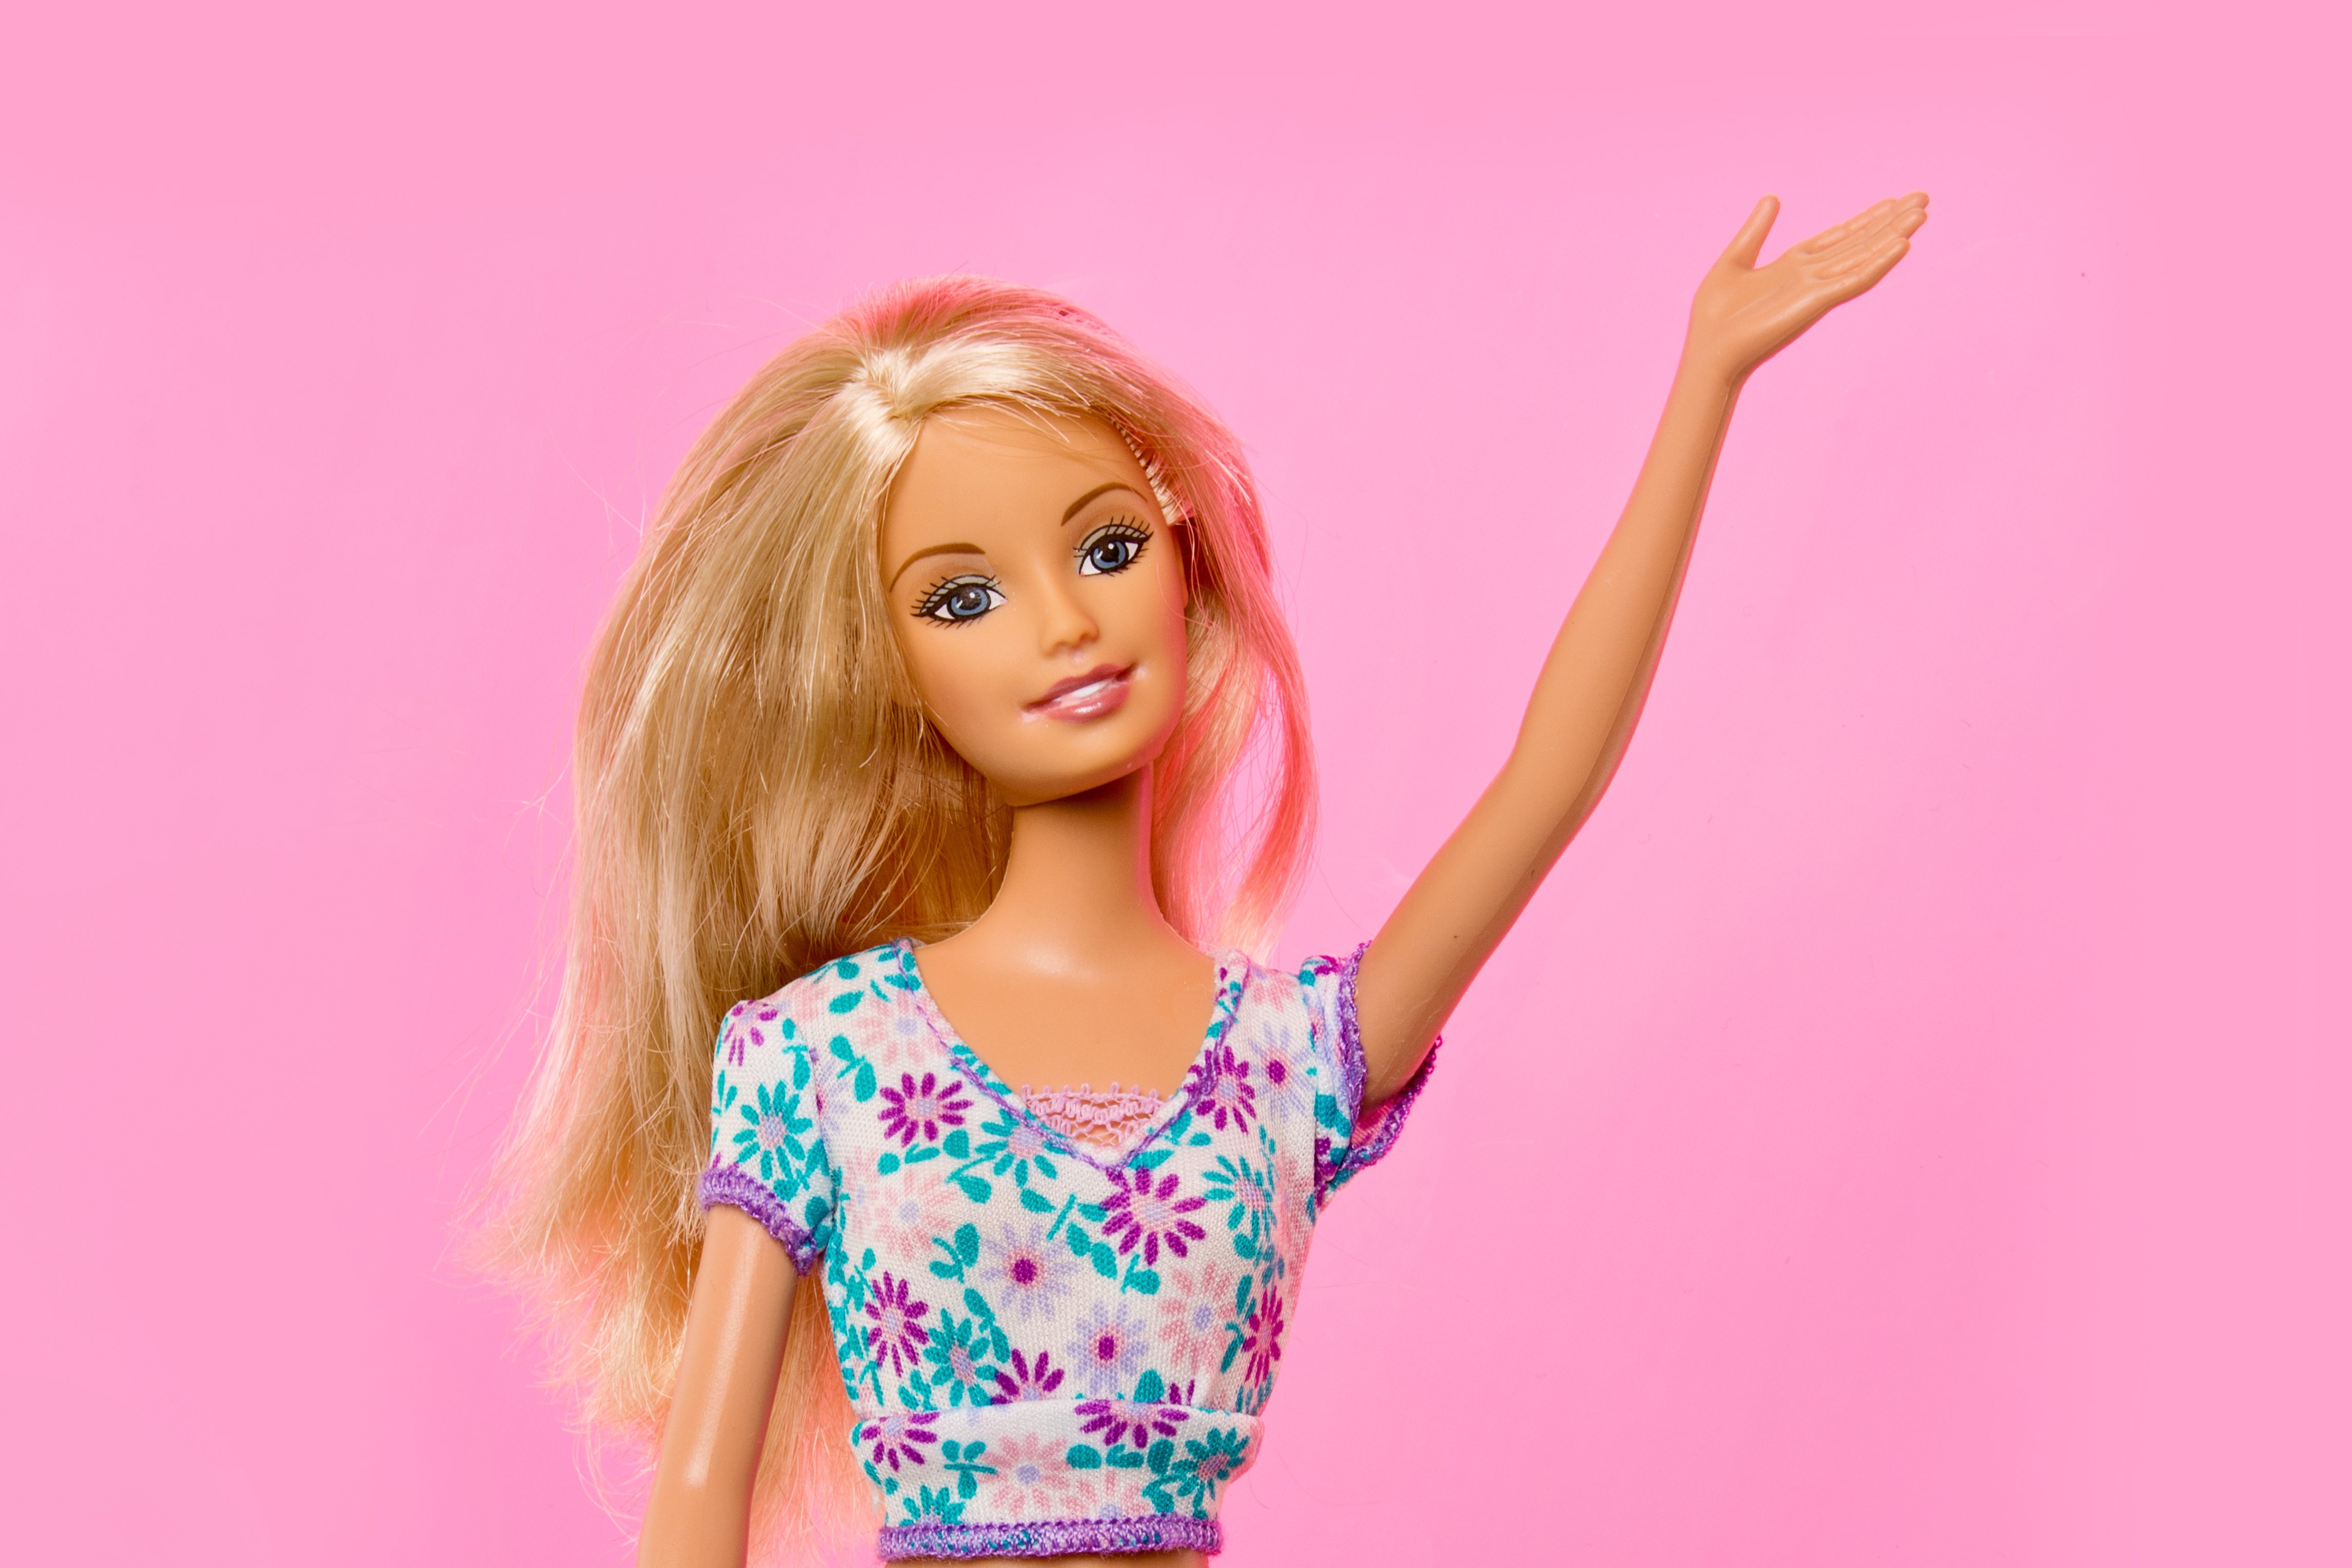 Barbie waving against a light pink background